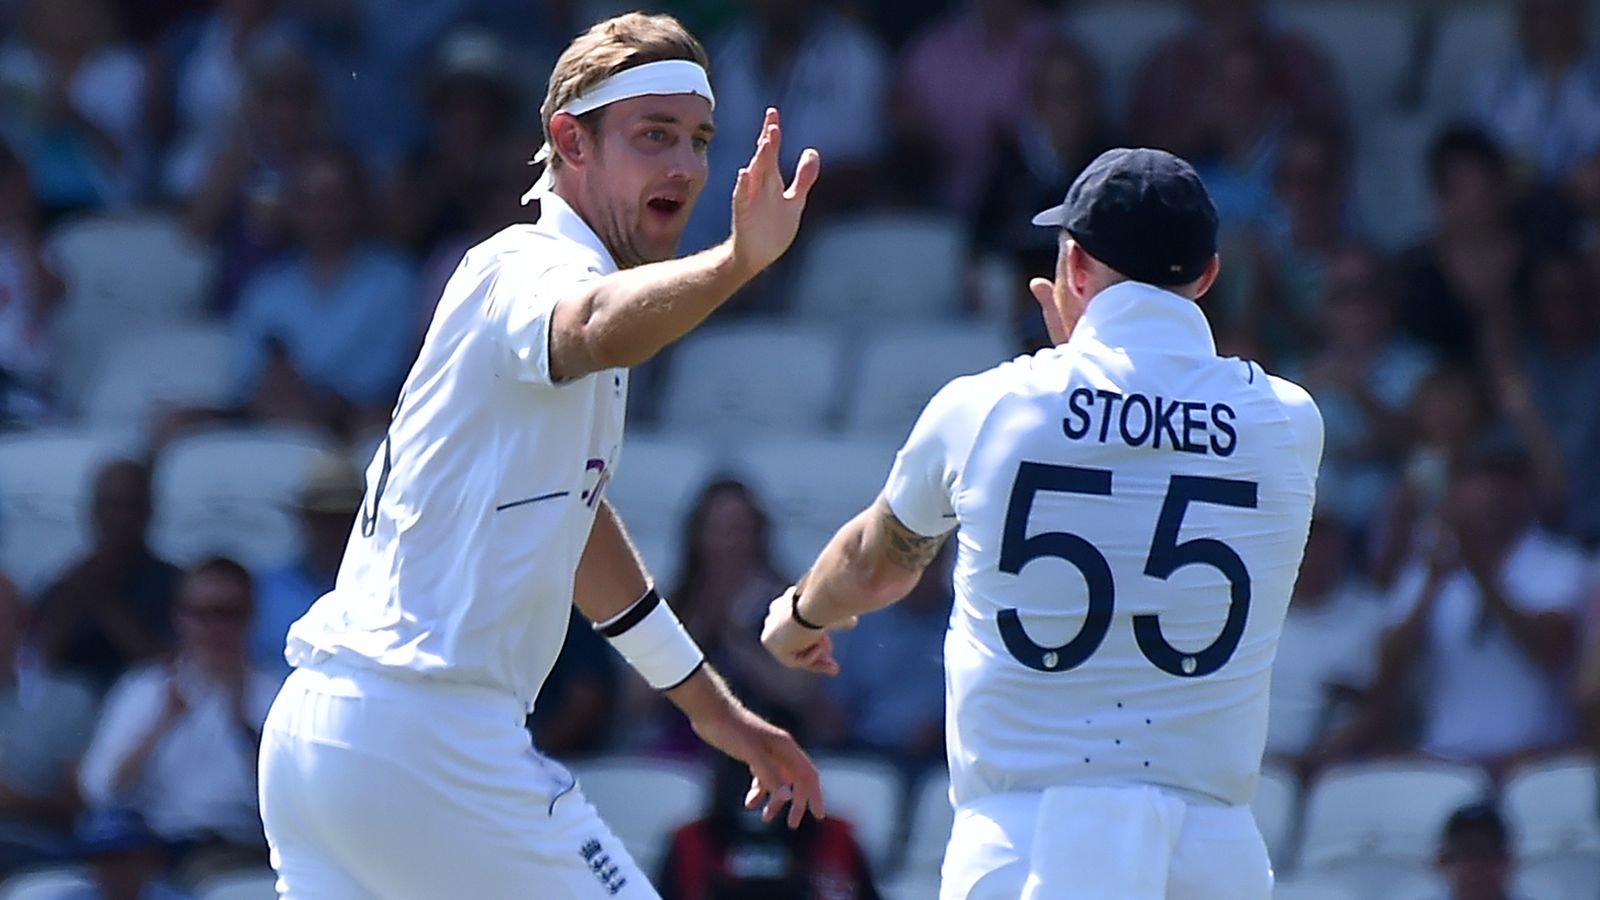 England remove New Zealand openers in first hour at Leeds LIVE!